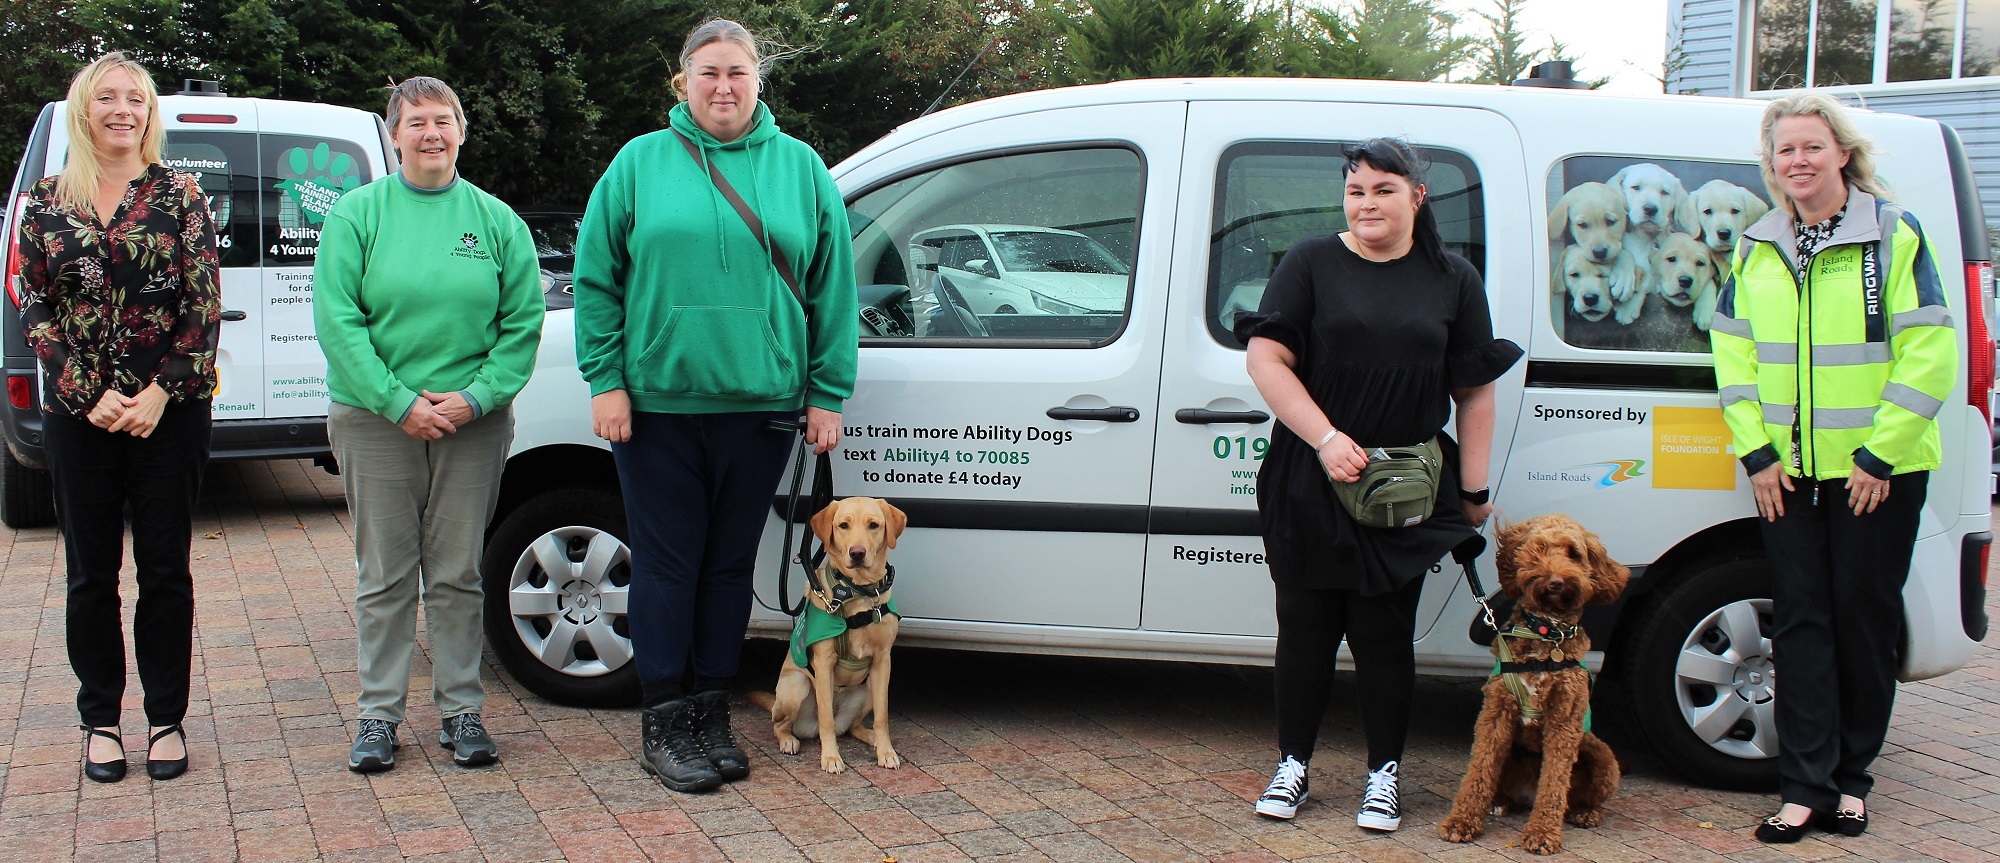 five people and two ability dogs standing in front of a vehicle